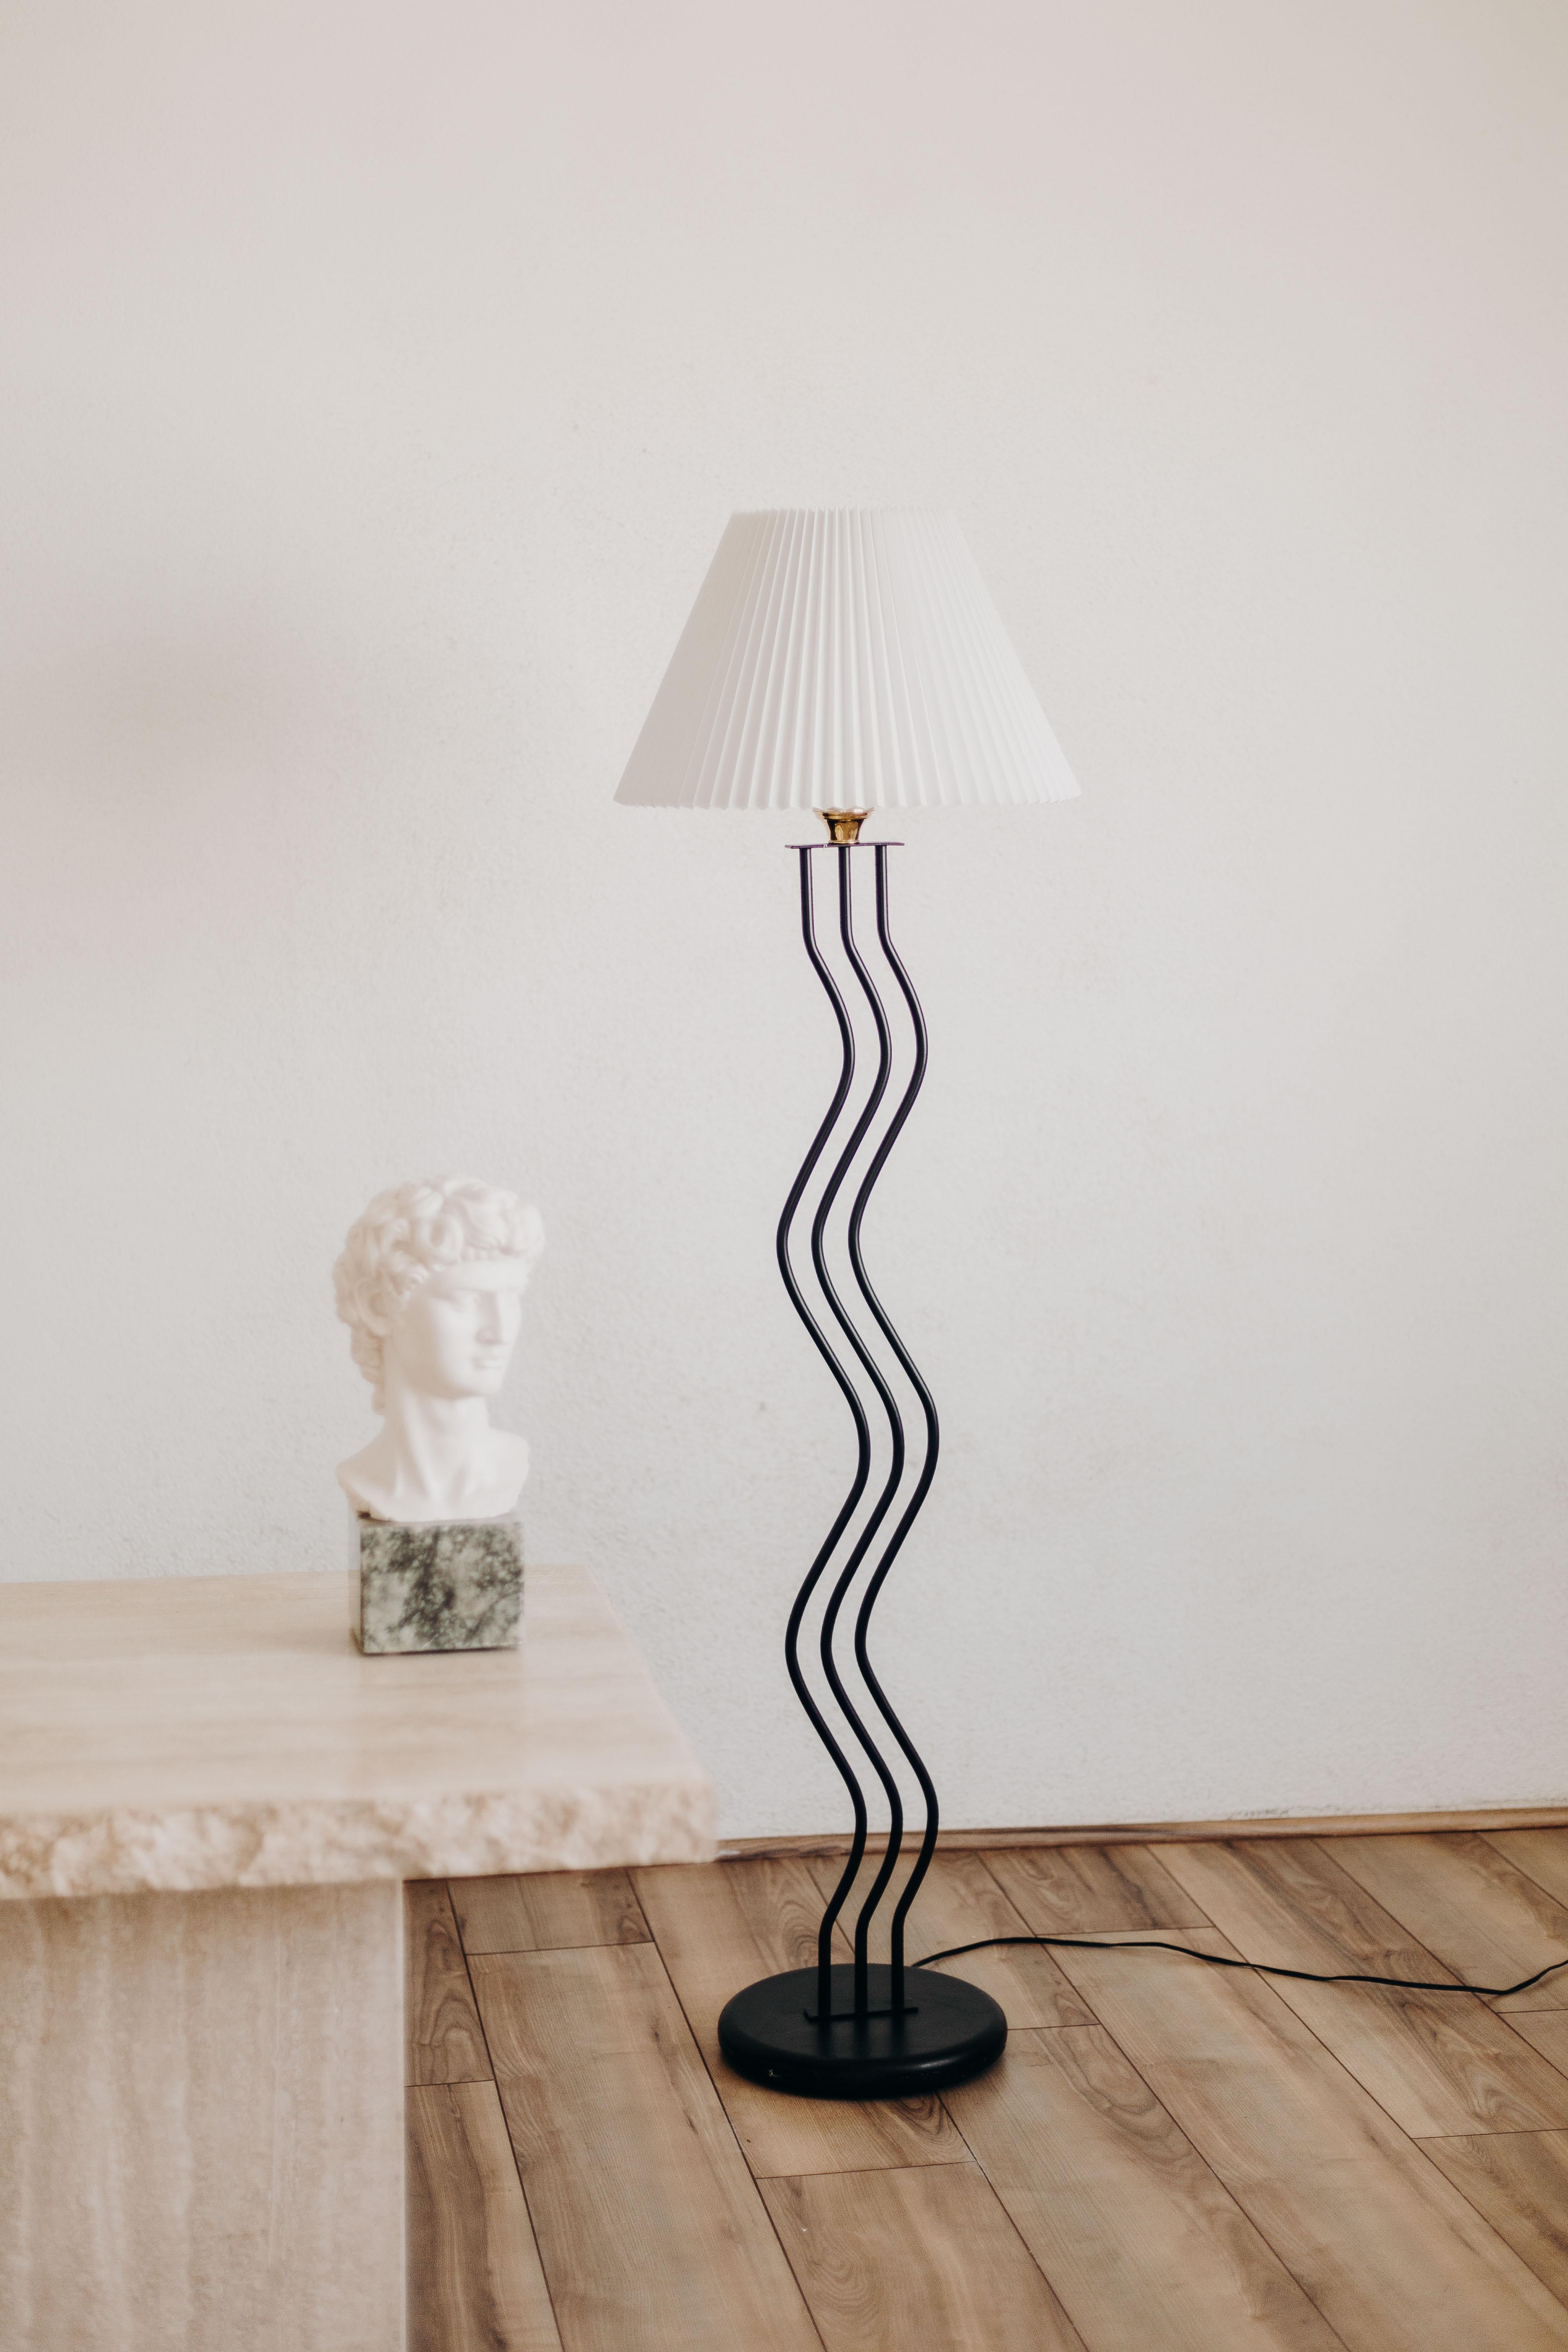 The vintage post-modern Memphis style floor lamp from the 1980s is a striking piece of furniture that showcases the best of bold design and playful aesthetics. The lamp's wave design is not only fun and current, but it is also a reflection of the